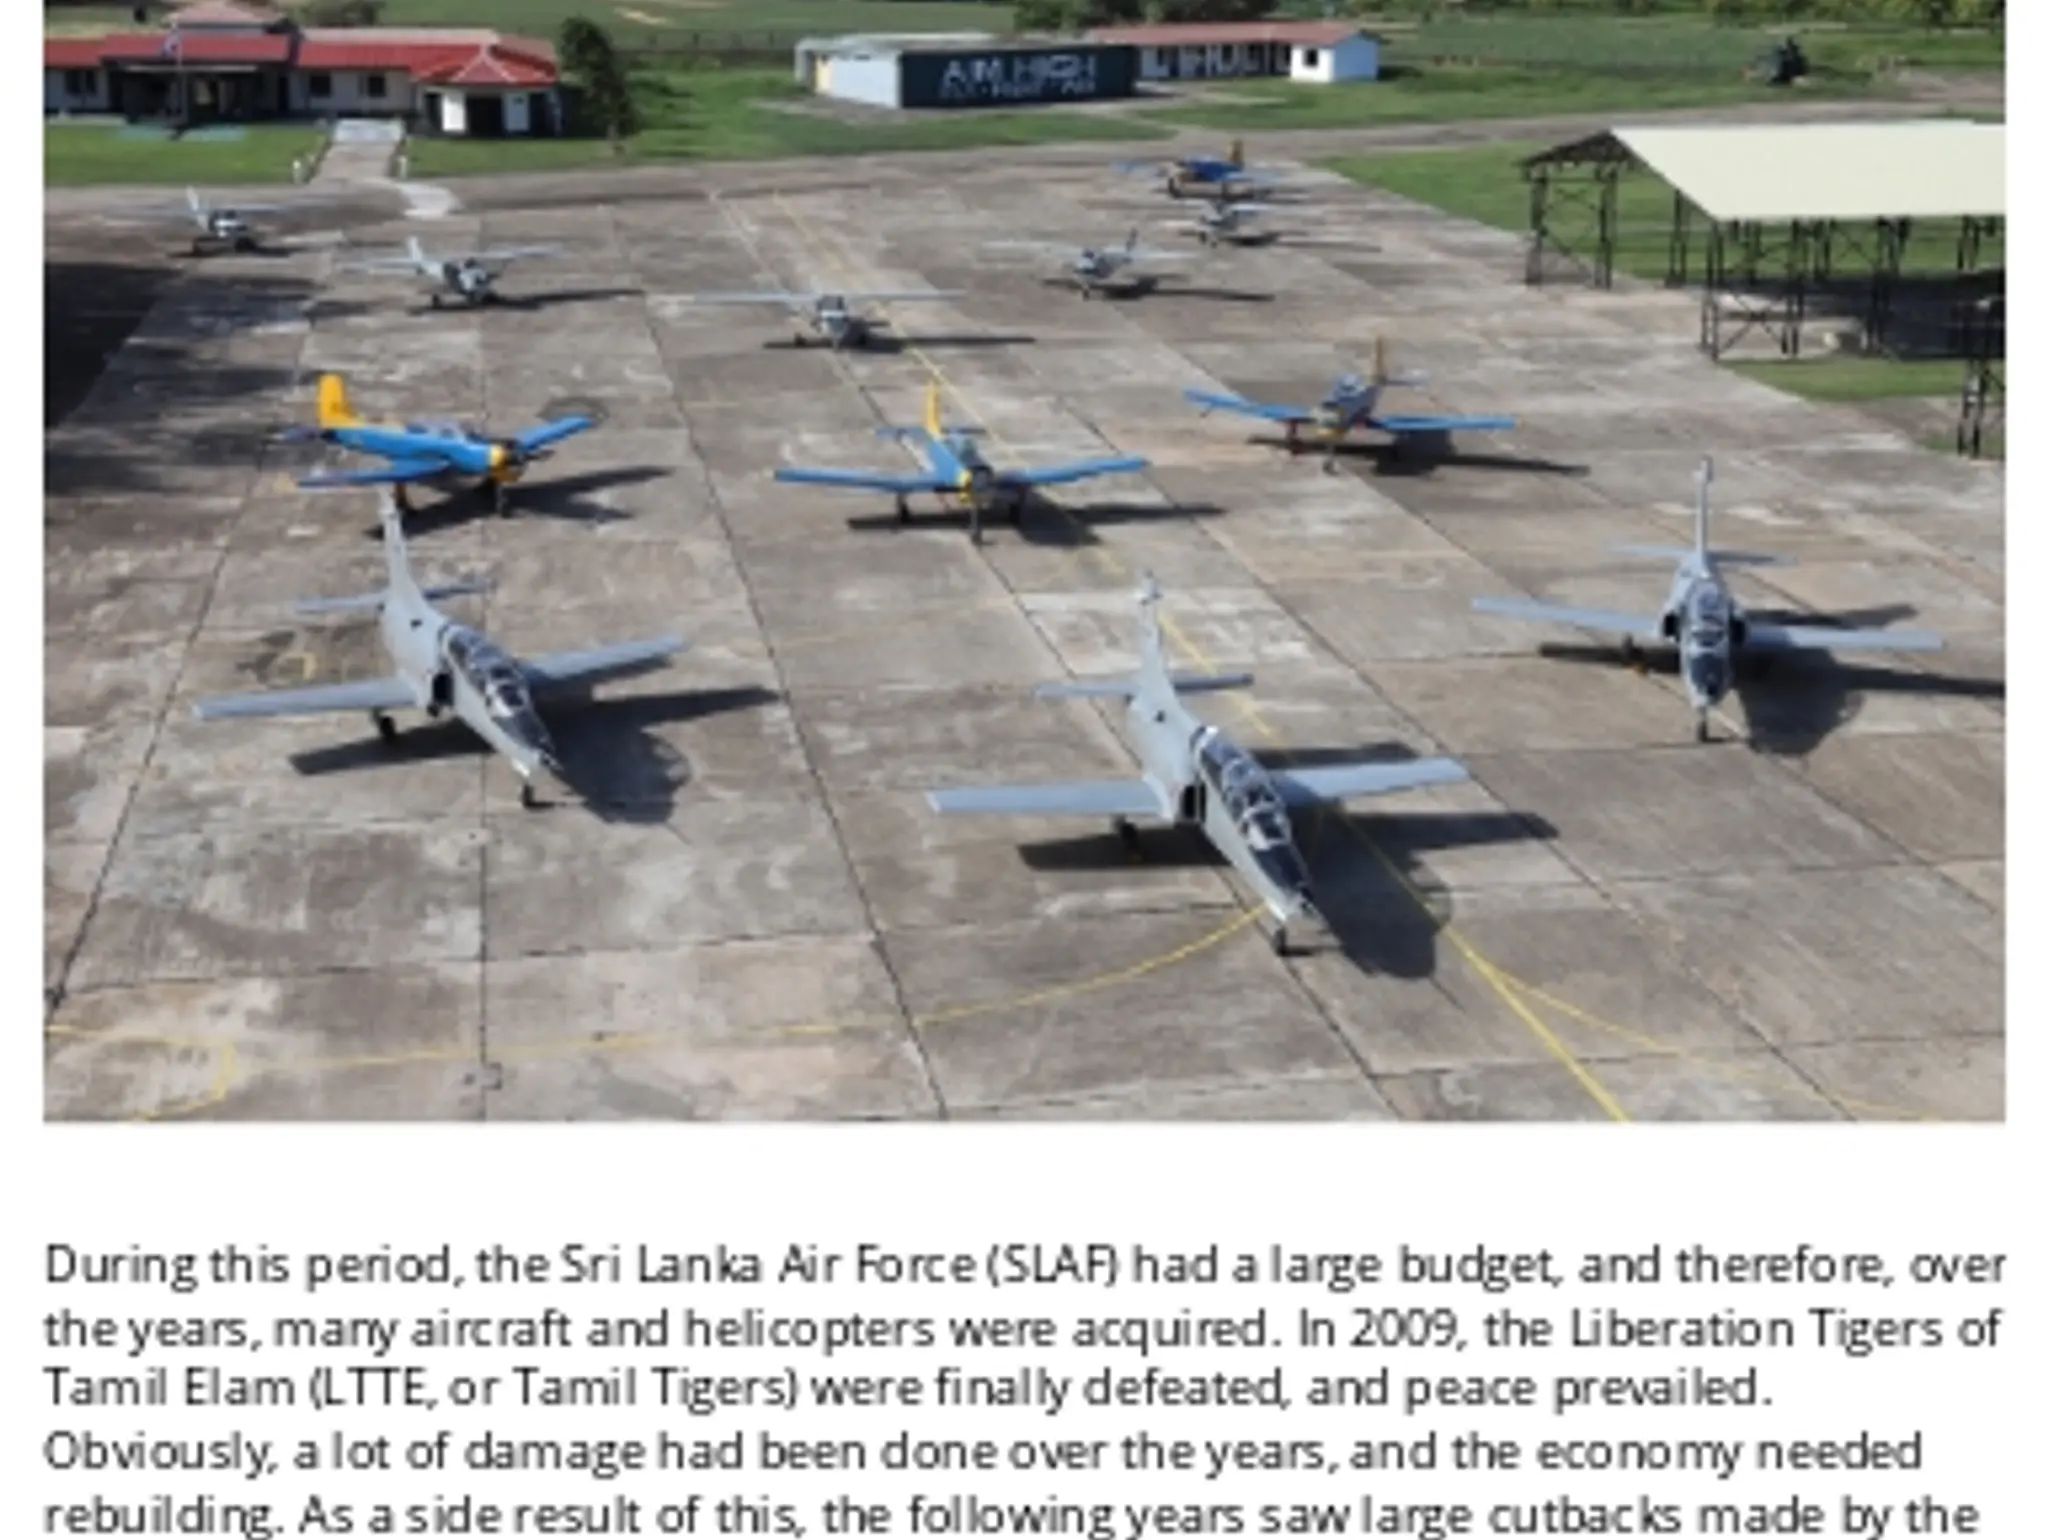 Right-sizing the Sri Lanka Air Force